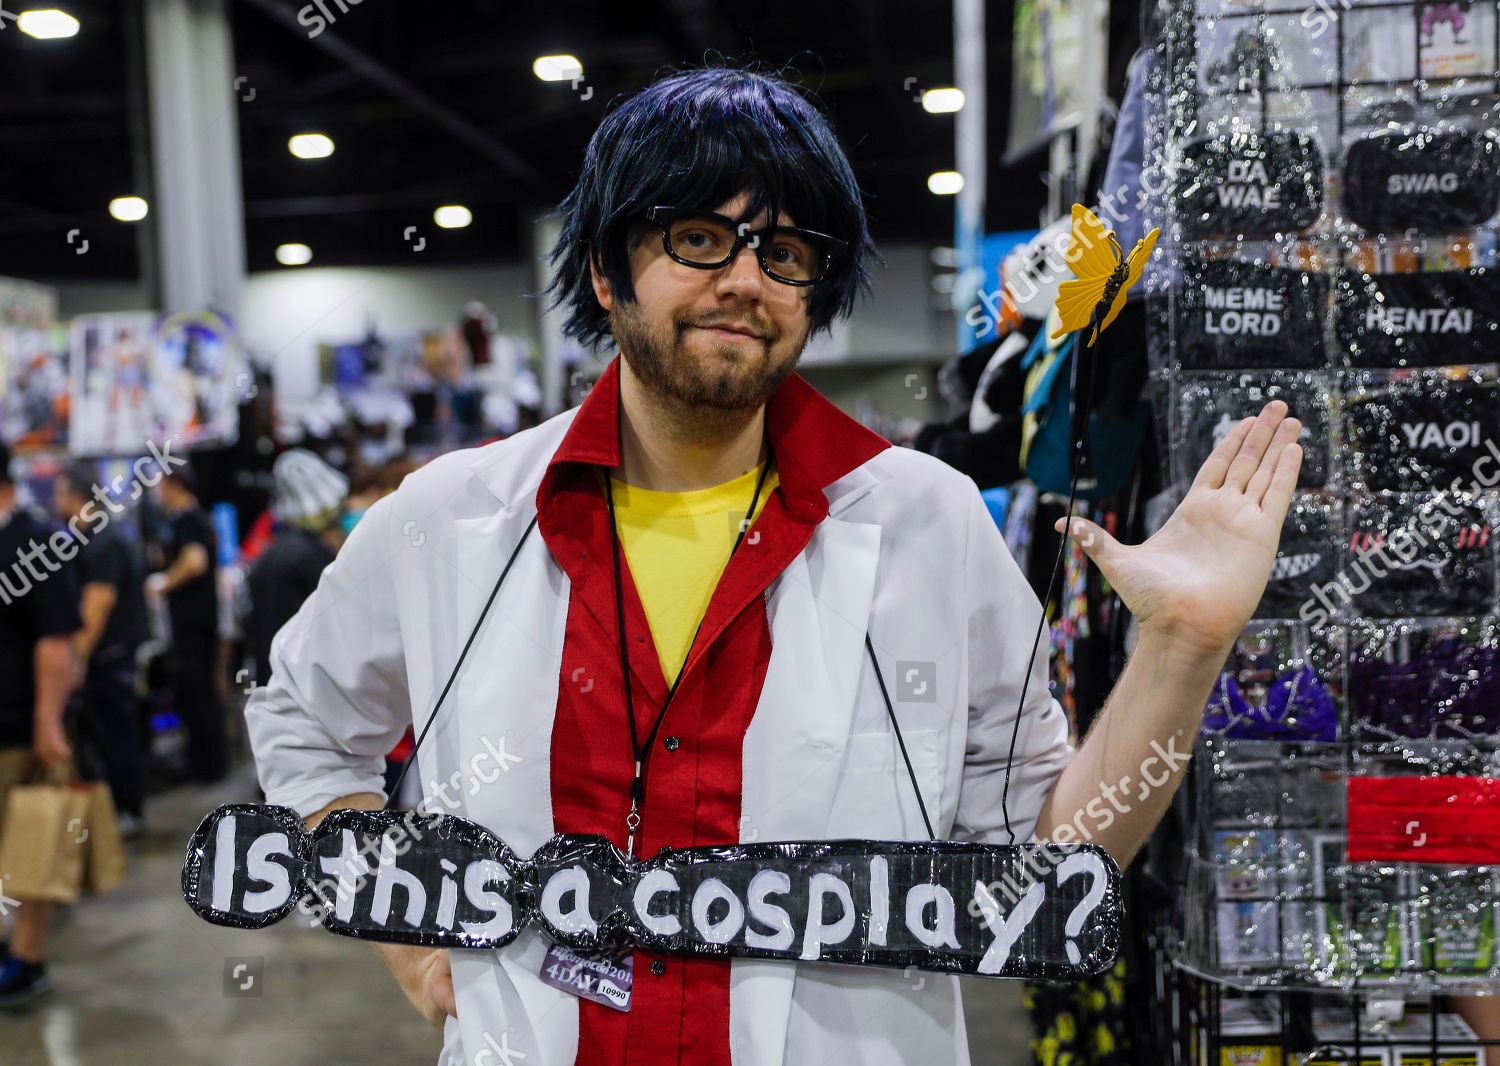 New Anime Convention Draws Thousands of Fans to Fort Worth  NBC 5  DallasFort Worth